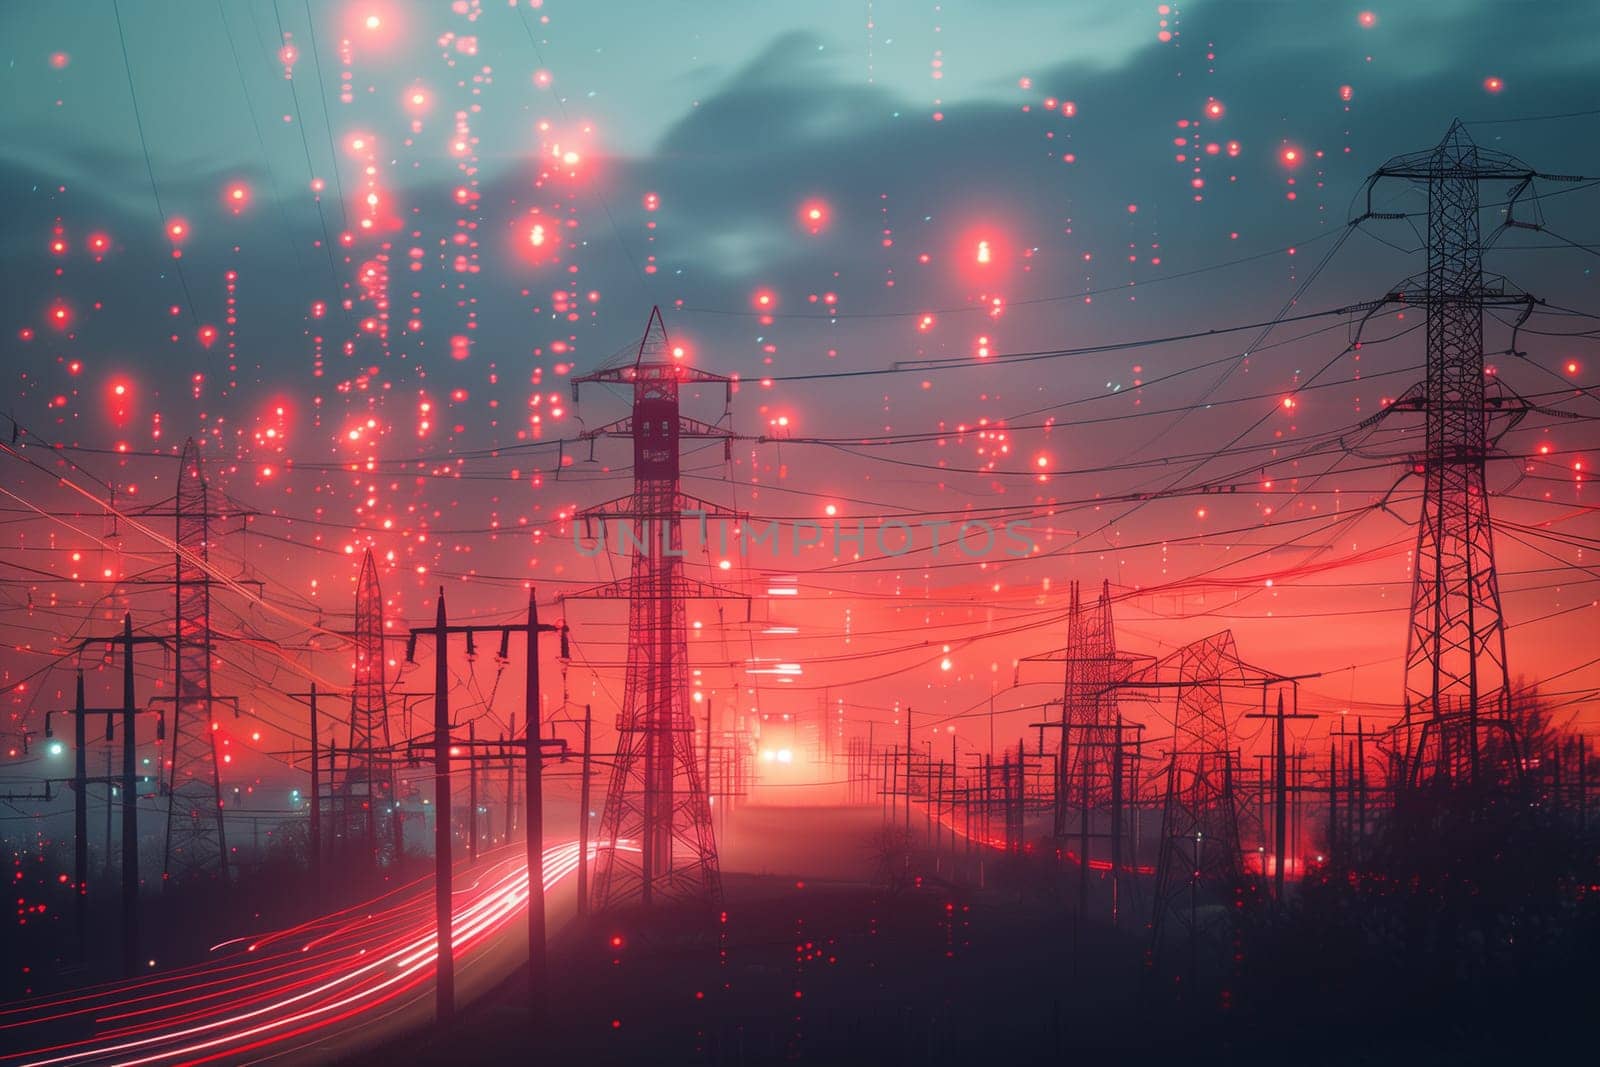 As the sun sets, a vibrant twilight casts a red glow over an expanse of power lines and communication towers, with illuminated orbs floating skyward.